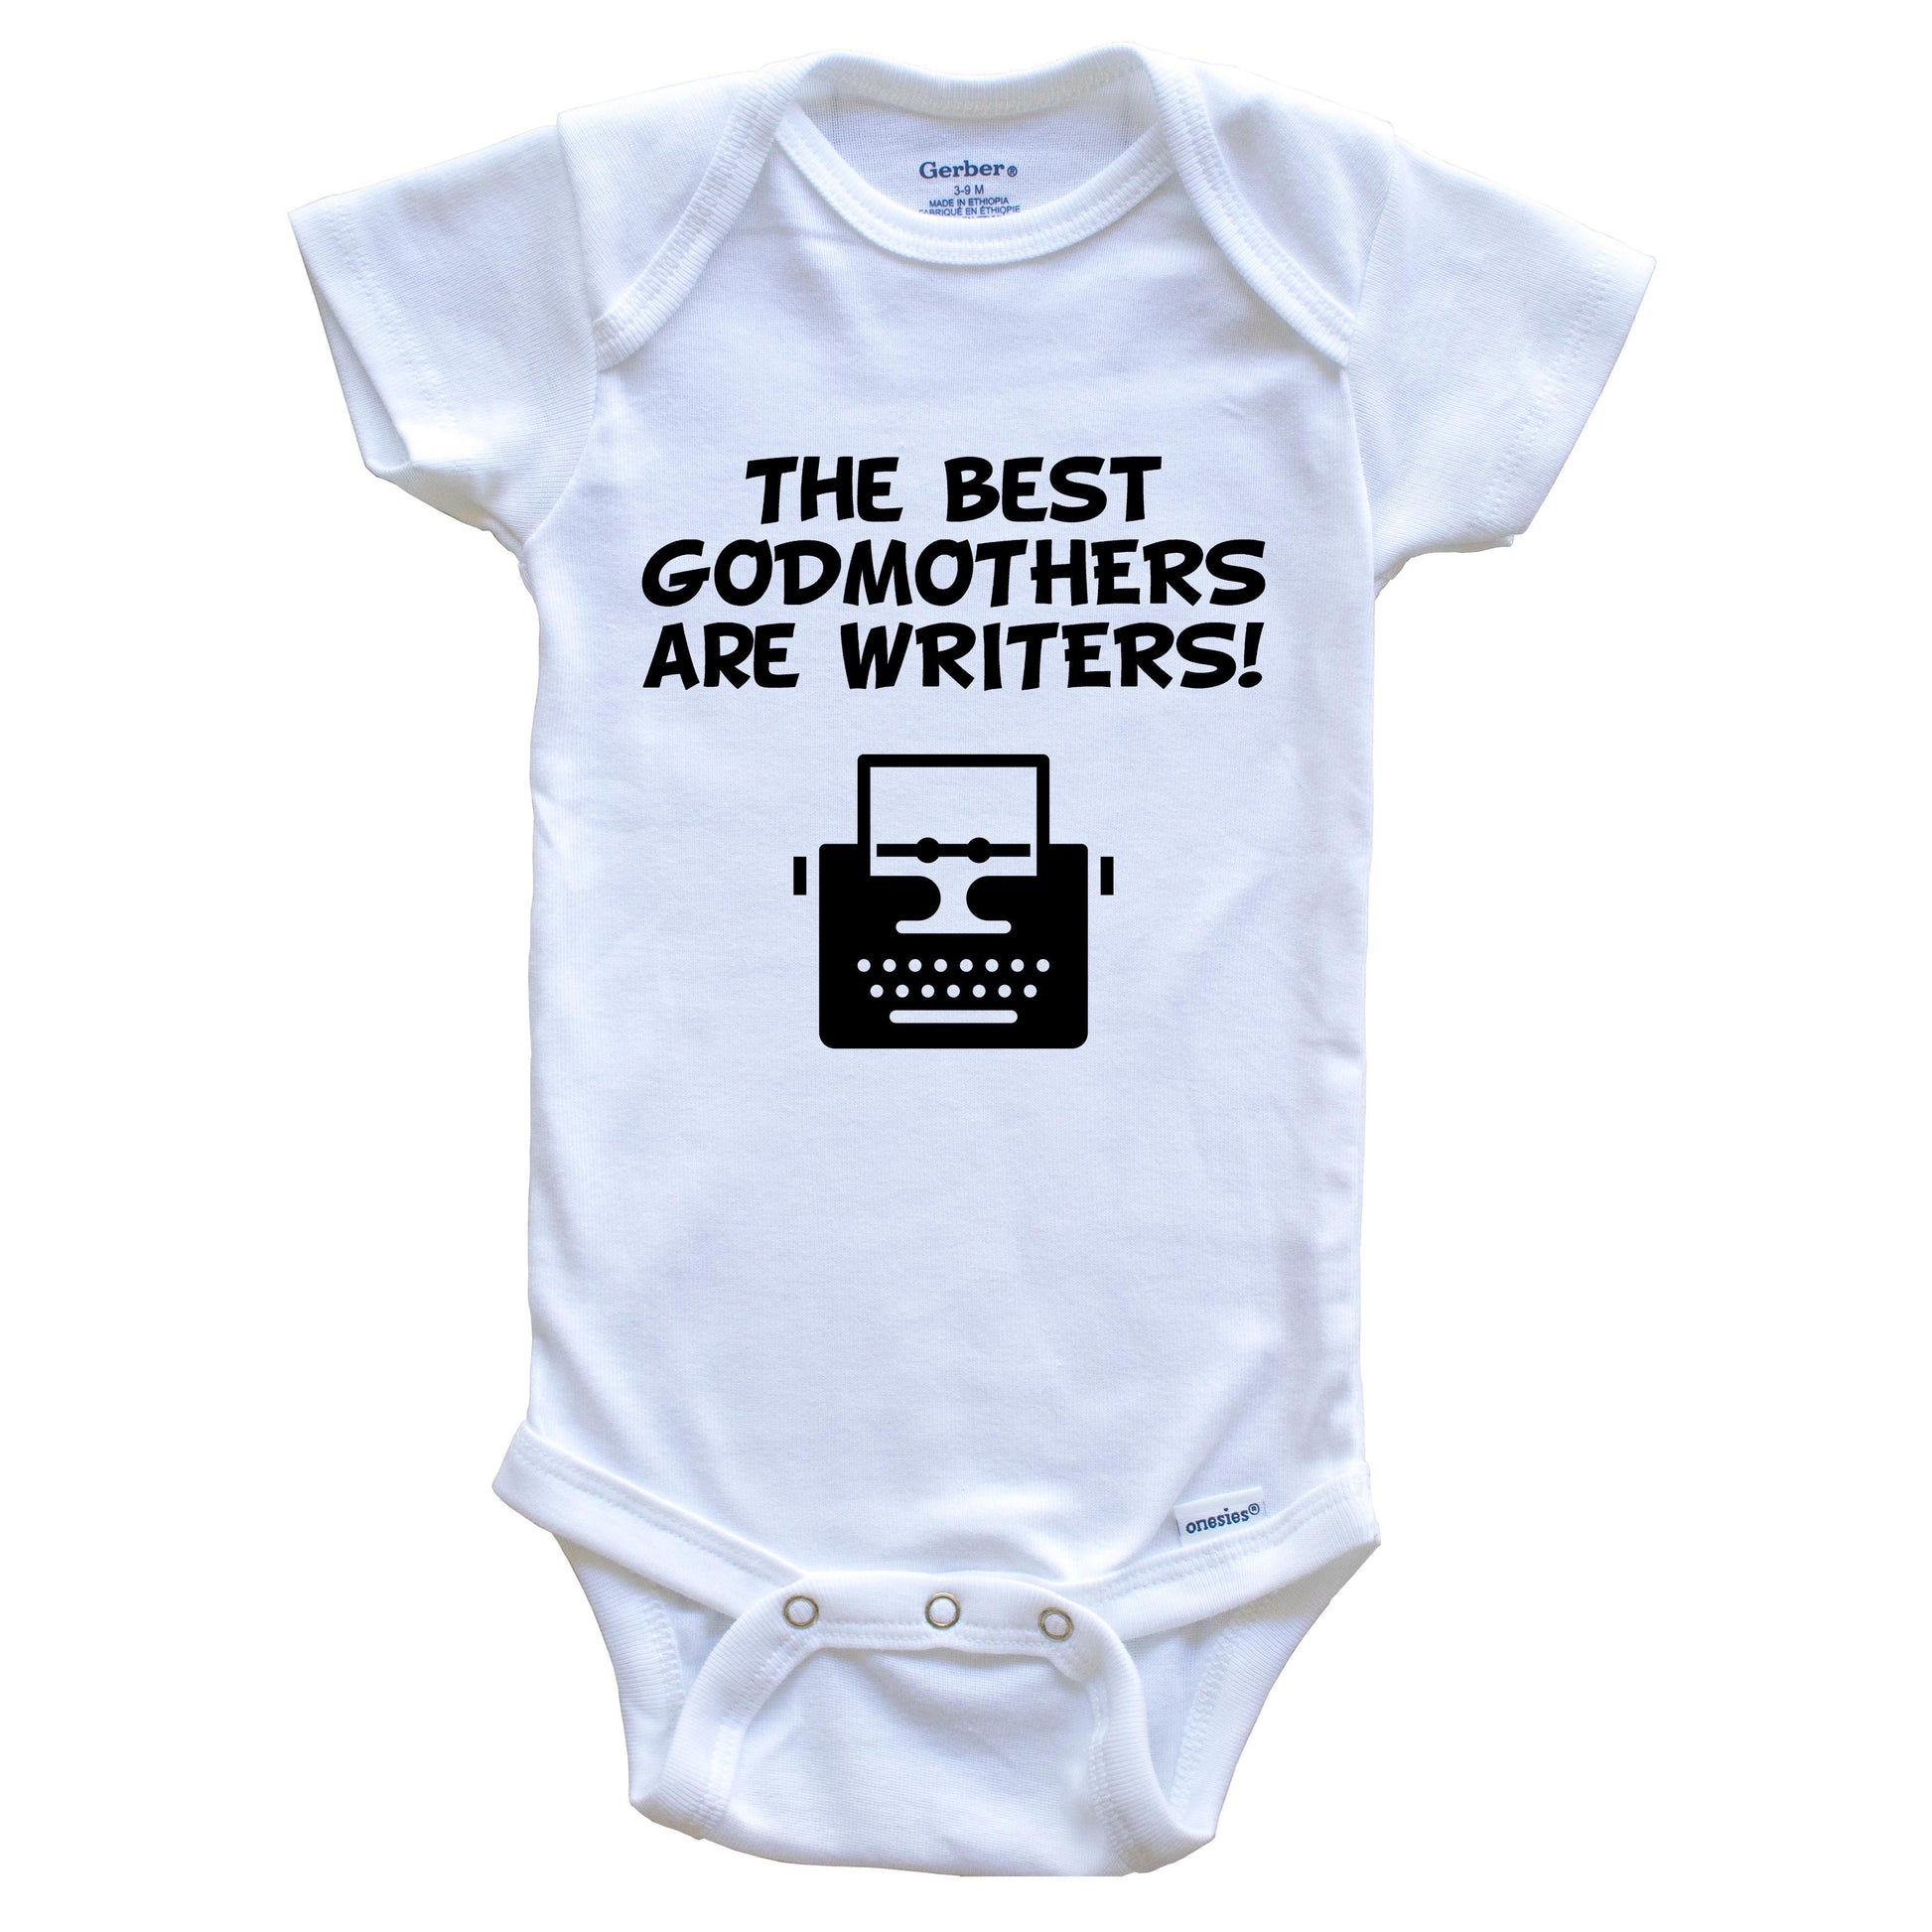 The Best Godmothers Are Writers Funny Godchild Baby Onesie